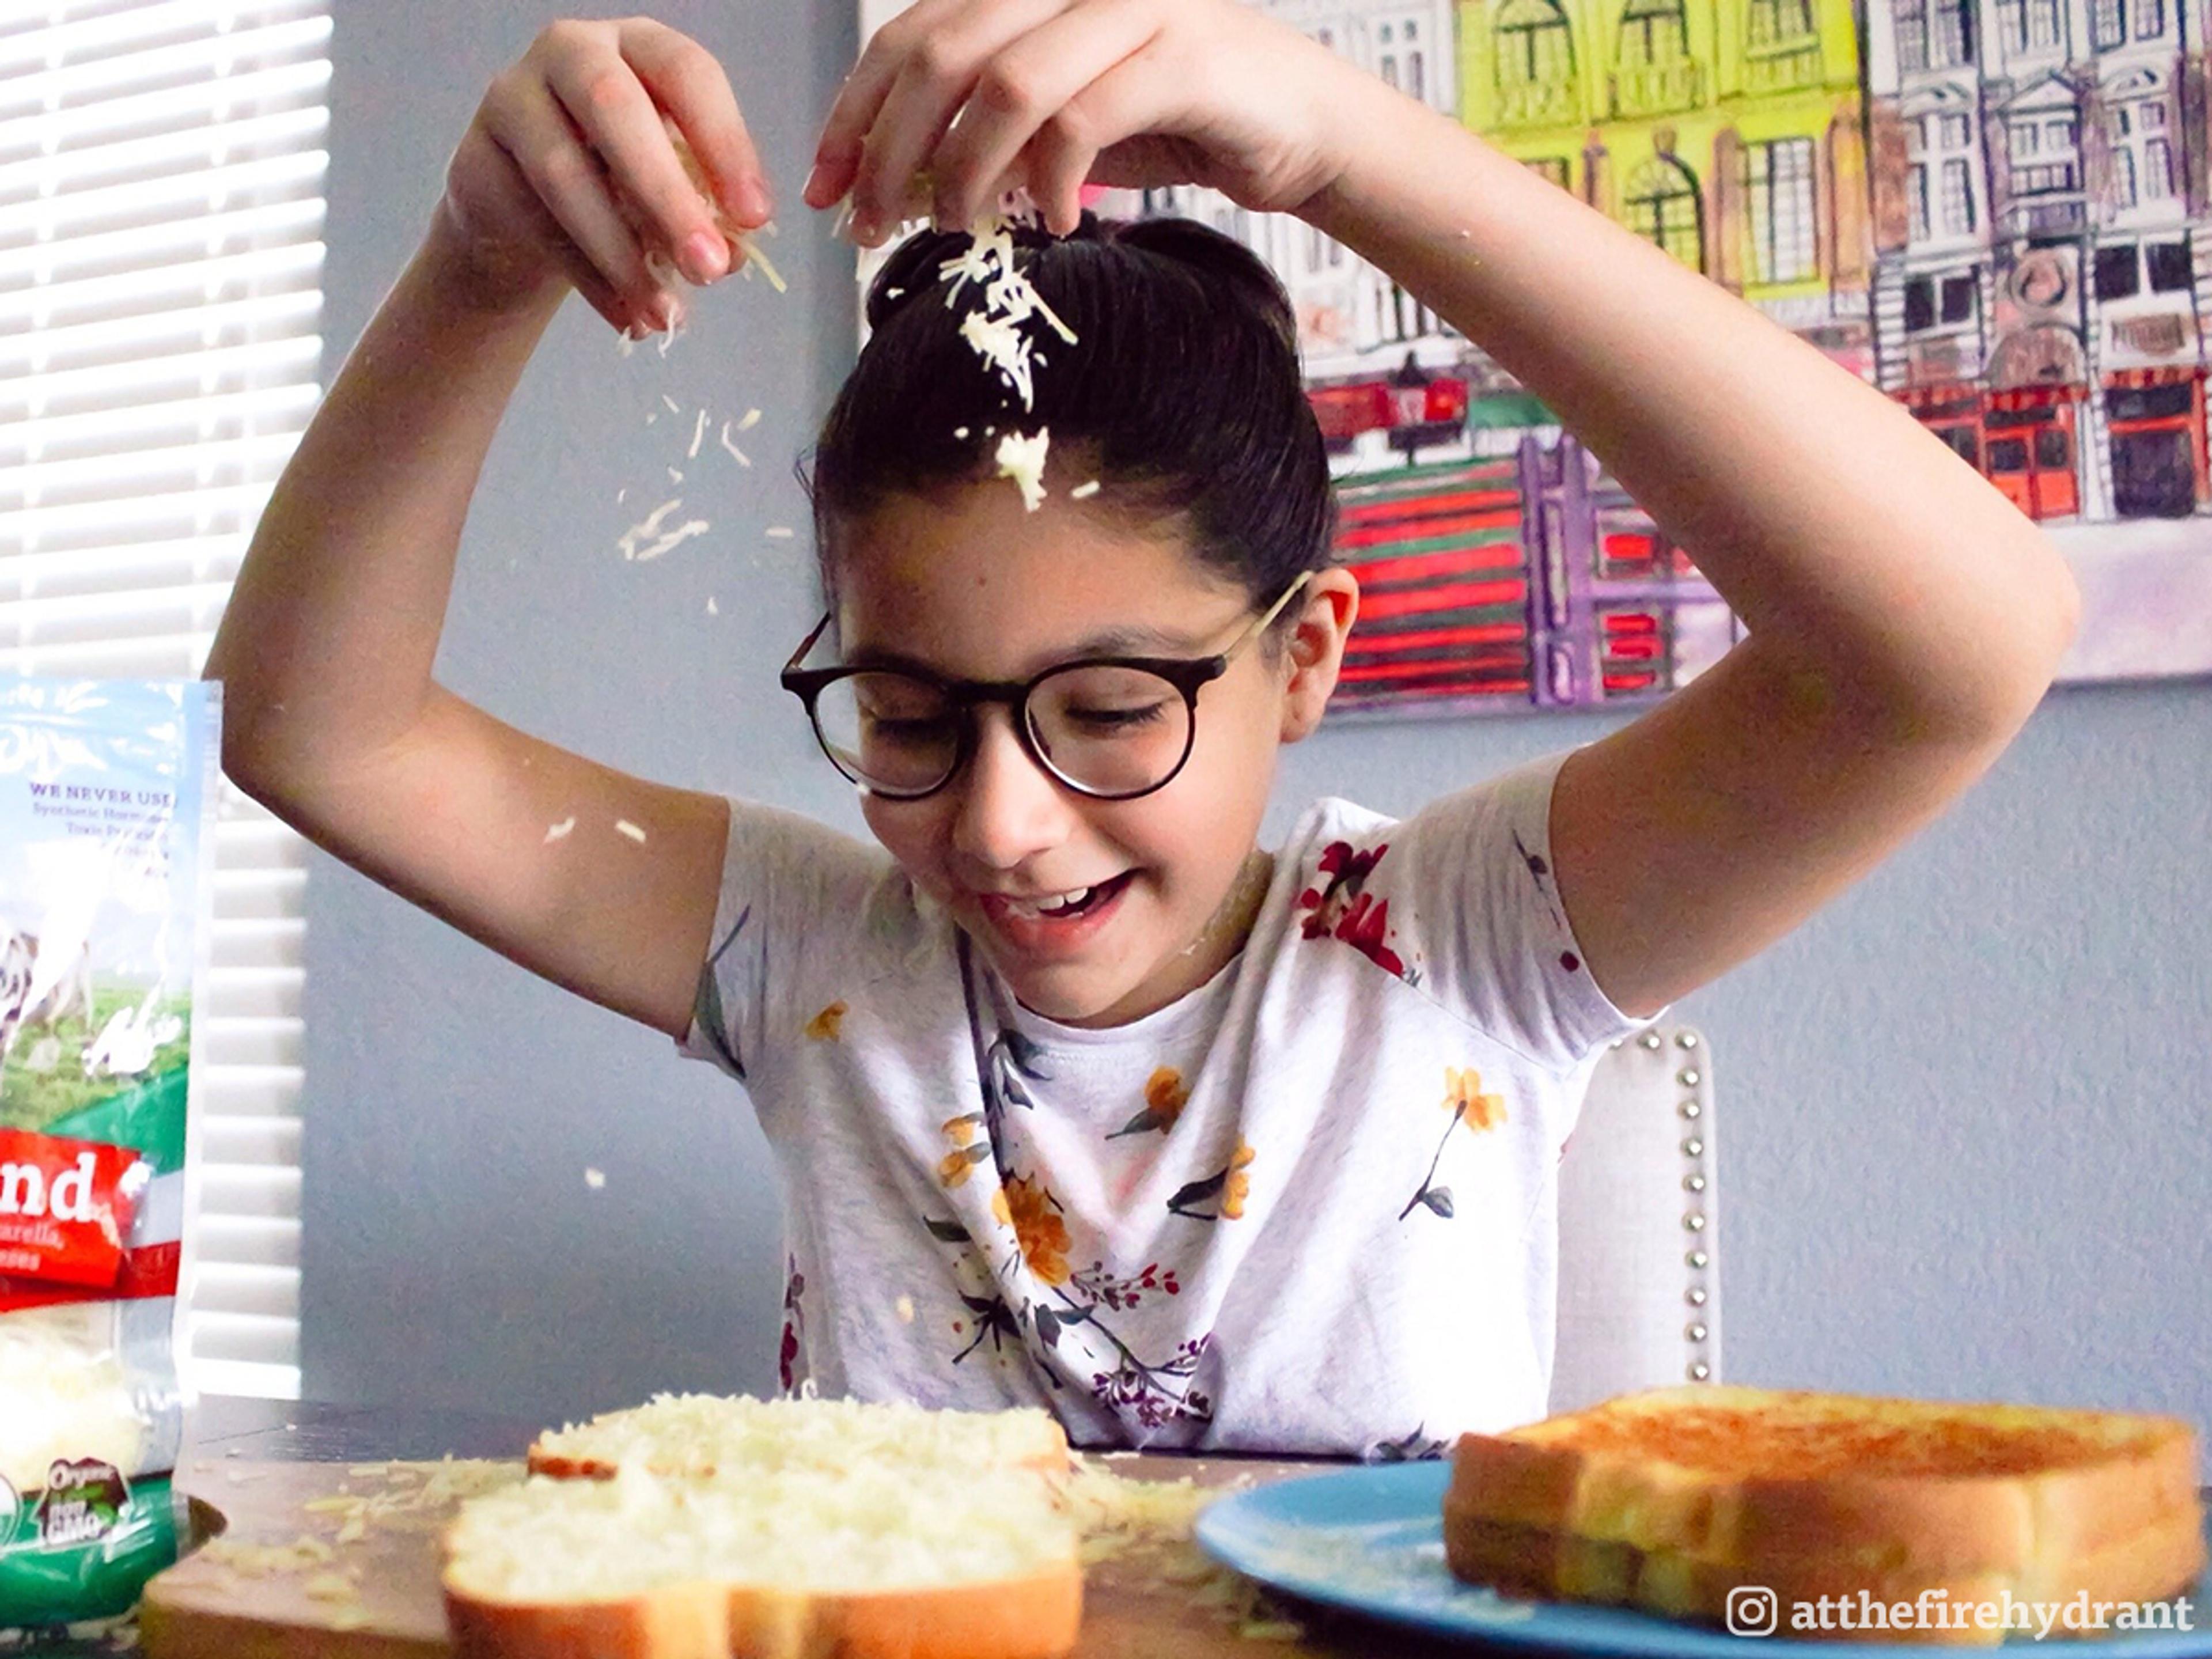 Preteen girl in glasses puts together a grilled cheese sandwich.